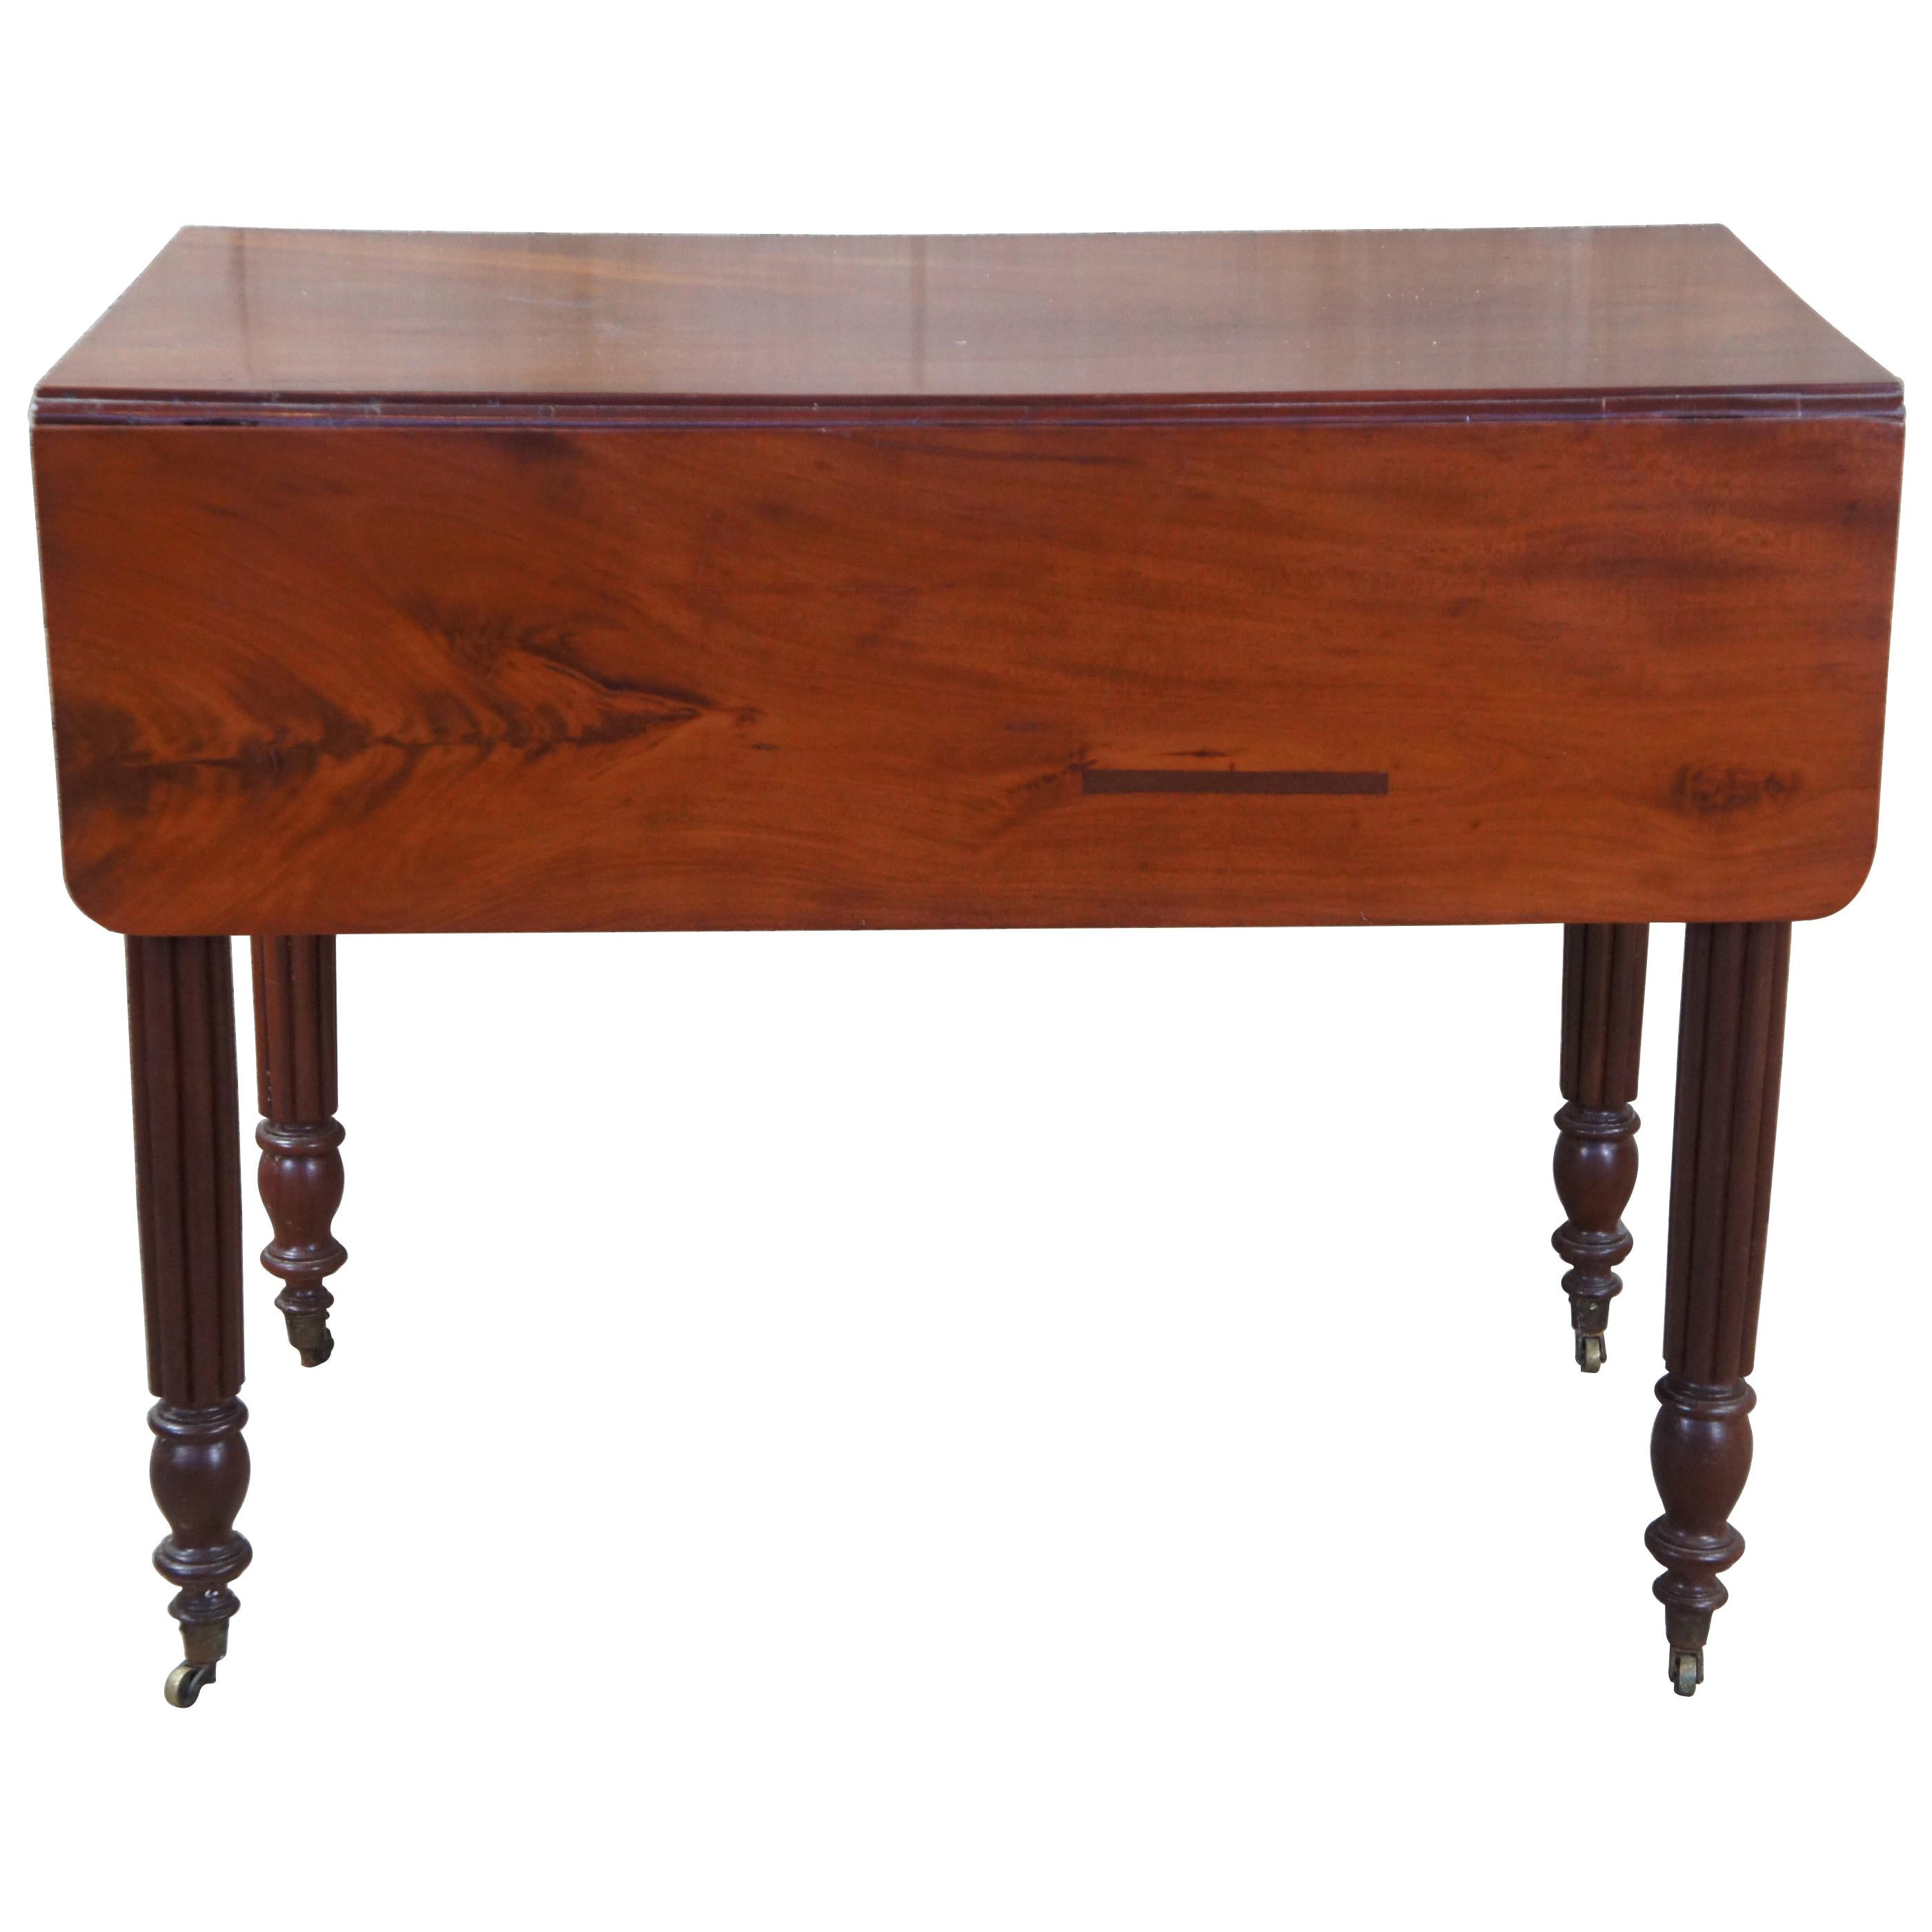 Weber Furniture Empire Revival American Flame Mahogany Drop Leaf Console Table